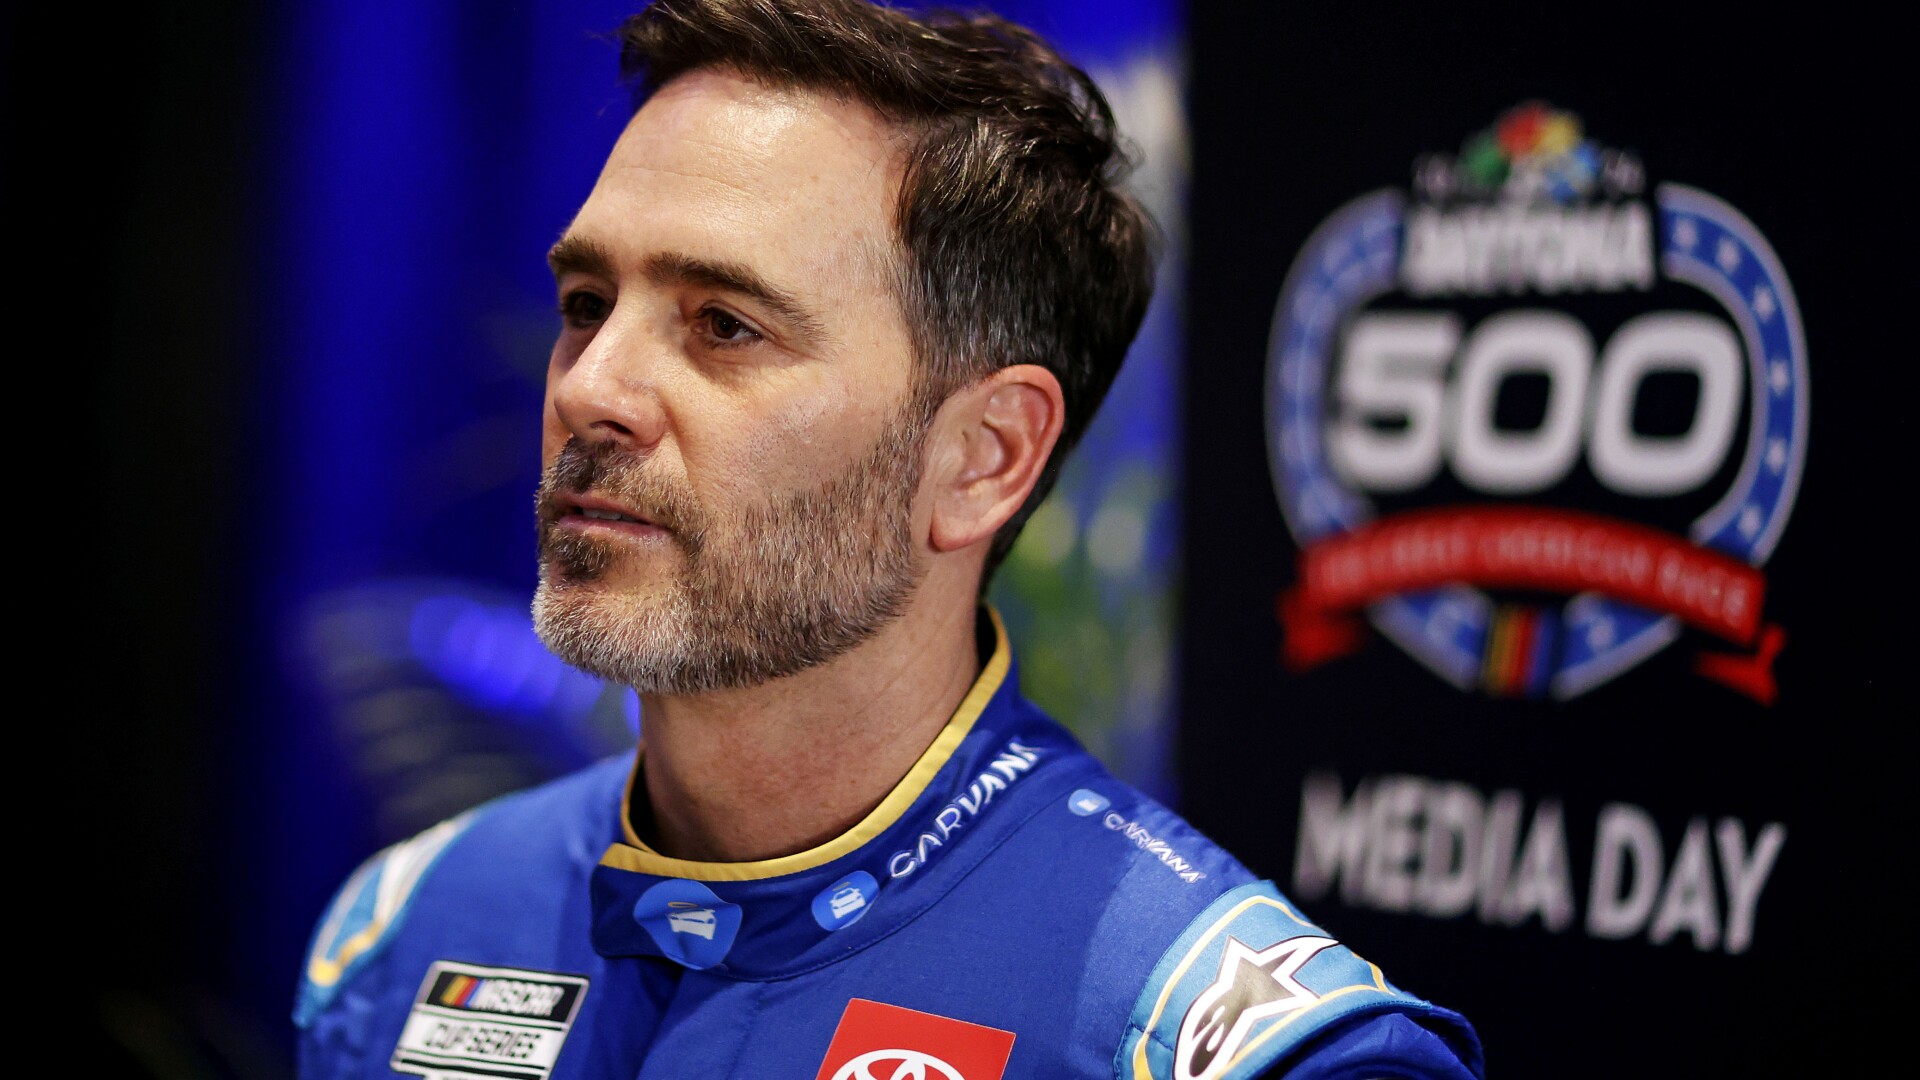 jimmie johnson does not secure spot in daytona 500 via qualifying